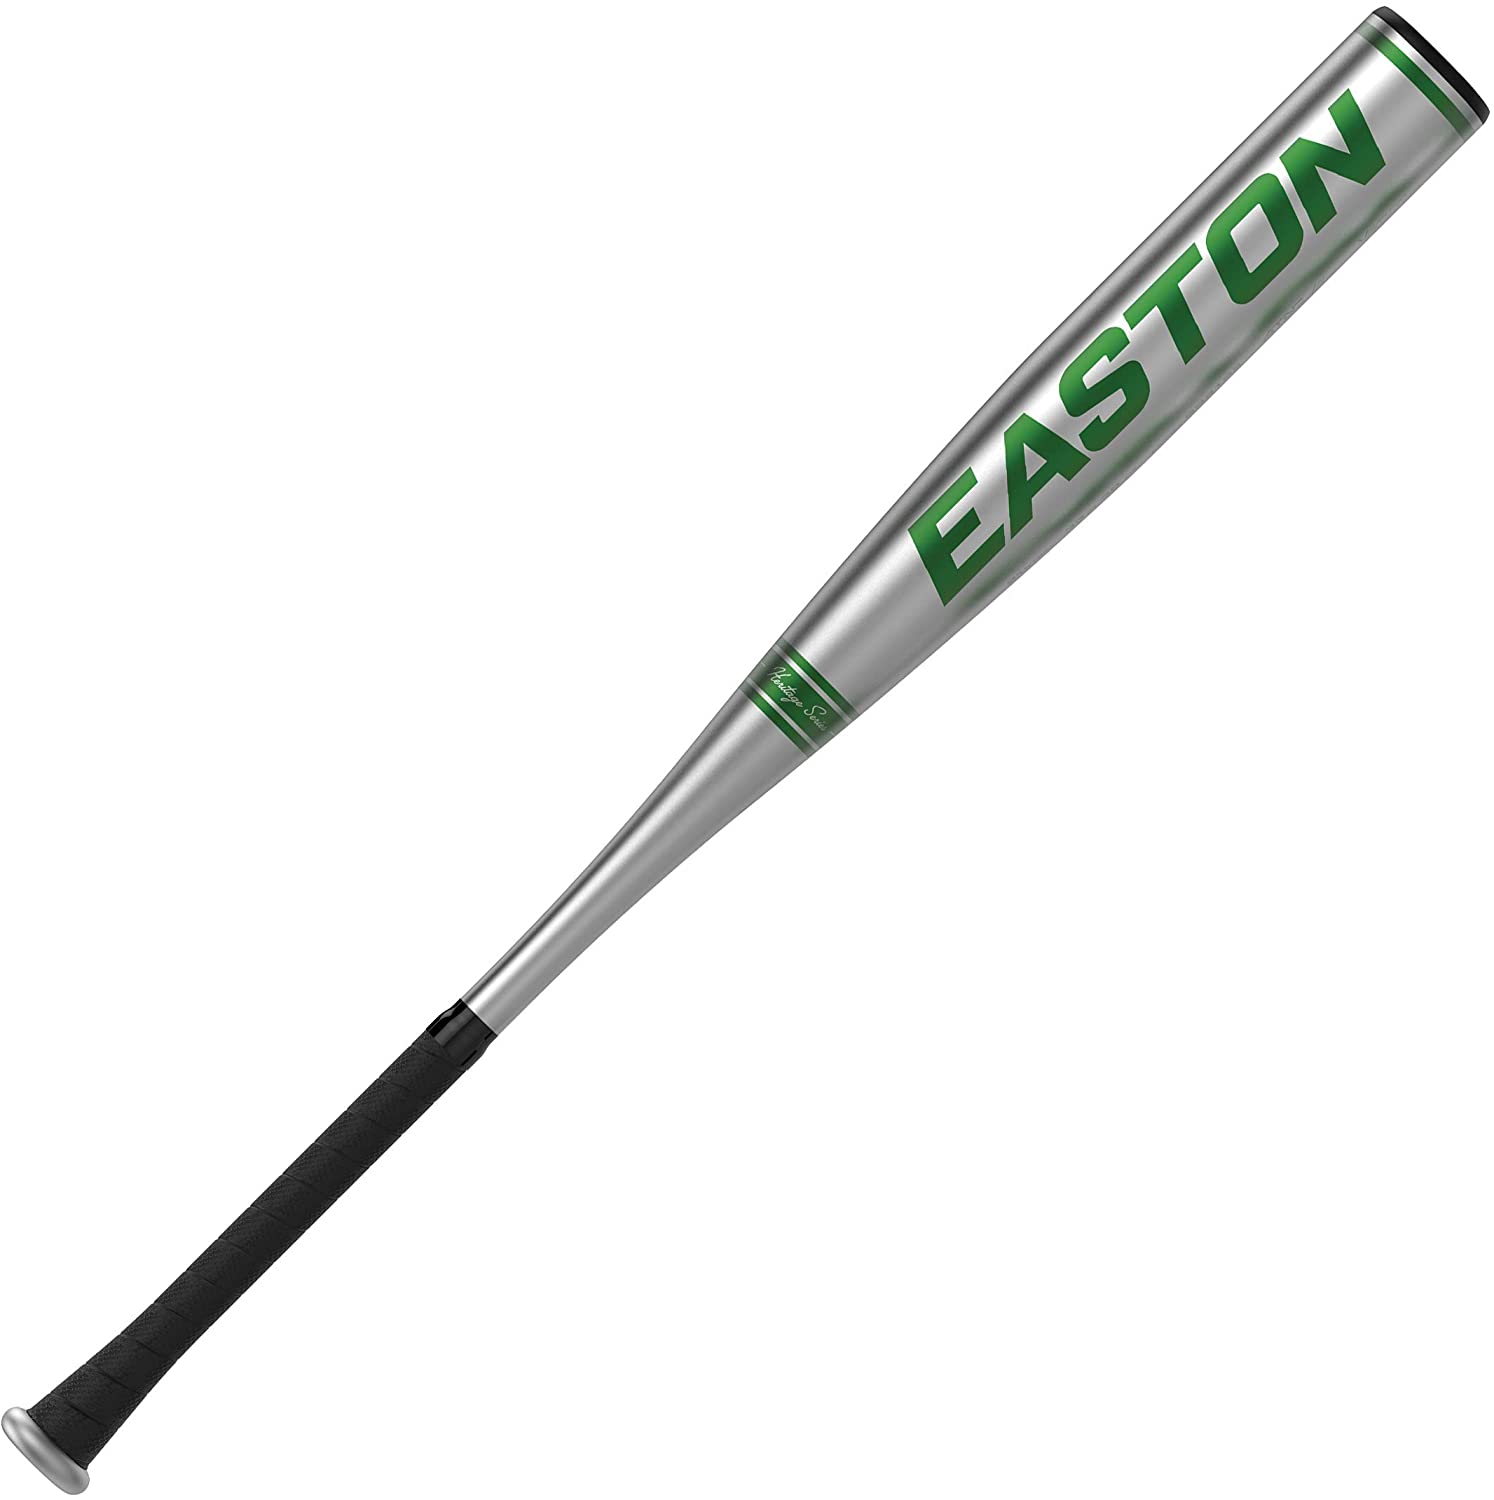 THE GREEN EASTON IS BACK! First introduced in 1978, the original B5 Pro Big Barrel bat boasted the largest barrel aluminum bat ever made to that point in time for a larger sweet spot. And after 40 years in the making, all of Easton’s innovations have produced a new breakthrough worthy of the B5 Pro Big Barrel name. The new B5 Pro features a ringless barrel with varying wall thicknesses. This premium Advanced Thermal Alloy Construction (ATAC) produces a bigger sweet spot and smoother feel for B5 Pro than any other bat of its kind. And, combining its construction with Easton’s Speed Cap, the B5 Pro also provides a more flexible and responsive barrel. Additionally, the bat’s Natural Pro Balance Swing Weight results in a balanced feel for both speed and power. Its Extra-Stiff ATAC Alloy Handle transfers maximum energy into the ball for a more professional feel and performance, while its VRS Handle Insert reinforces the handle to reduce vibration and create an even more solid feel. The B5 Pro also has a premium grip, which provides the ultimate combination of cushion and tack. Not only is the 2021 B5 Pro the best performance, feel and sound that Easton has ever engineered in a 1-piece aluminum BBCOR bat, the bat’s design is a modern remix of The Green Easton’s classic look. THIS CHANGES EVERYTHING. AGAIN. - -3 Length to Weight Ratio - 2 5/8 Inch Barrel Diameter - 1-Piece Advanced Thermal Alloy Construction (ATAC) - Extra-Stiff ATAC Alloy Handle - VRS Handle Insert - Pro Balanced Swing Weight - Ringless Barrel with Varying Wall Thicknesses - Speed Cap End Cap - BBCOR Certified 